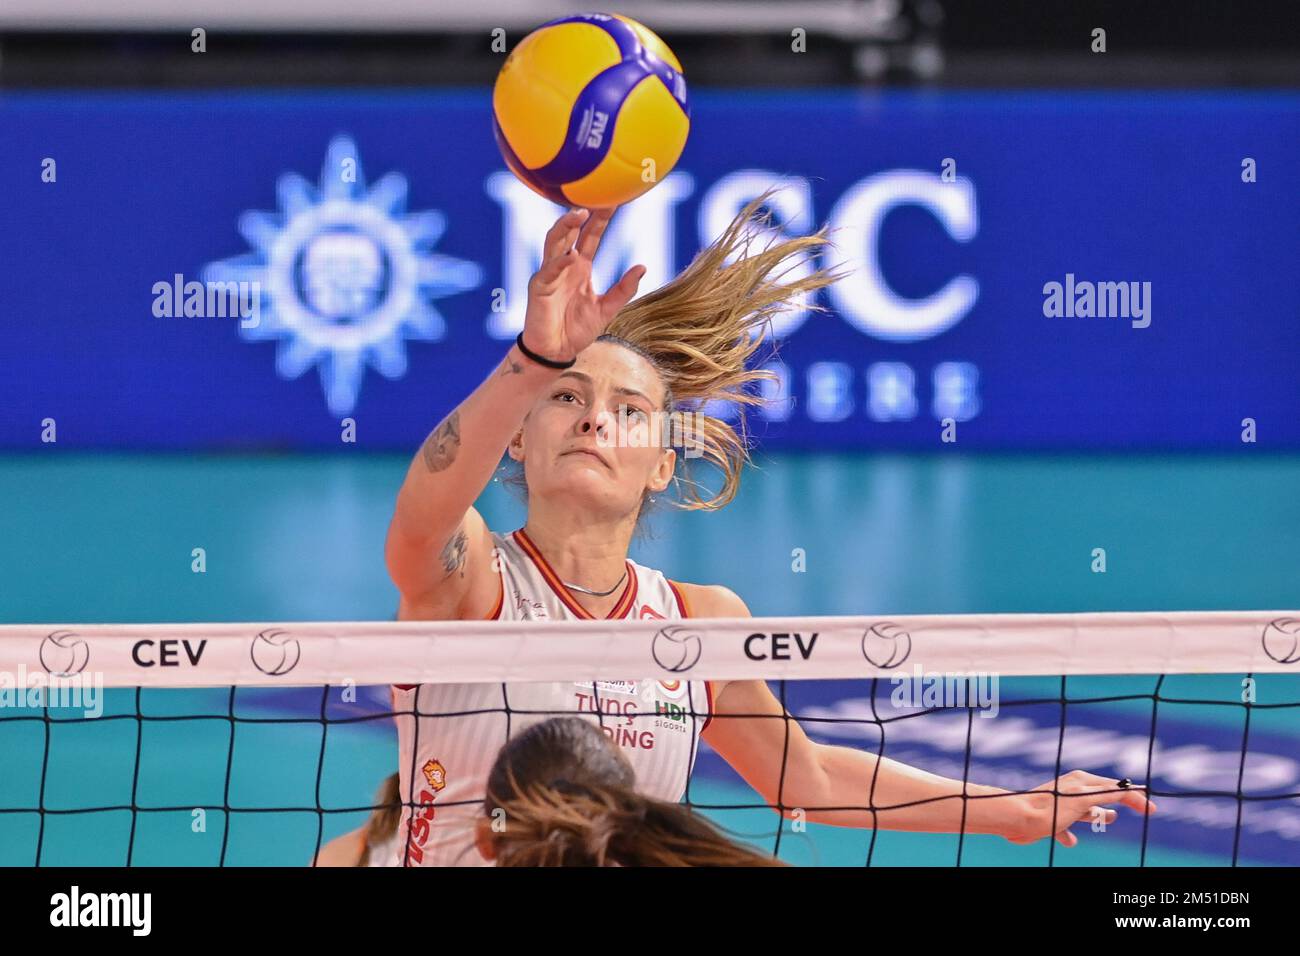 Florence, Italy. 22nd Dec, 2022. Anthi Vasilantonaki (Galatasaray HDI Sigorta Istanbul) during Savino Del Bene Scandicci vs Galatasaray HDI Sigorta Istanbul, Volleyball CEV Cup Women Championship in Florence, Italy, December 22 2022 Credit: Independent Photo Agency/Alamy Live News Stock Photo